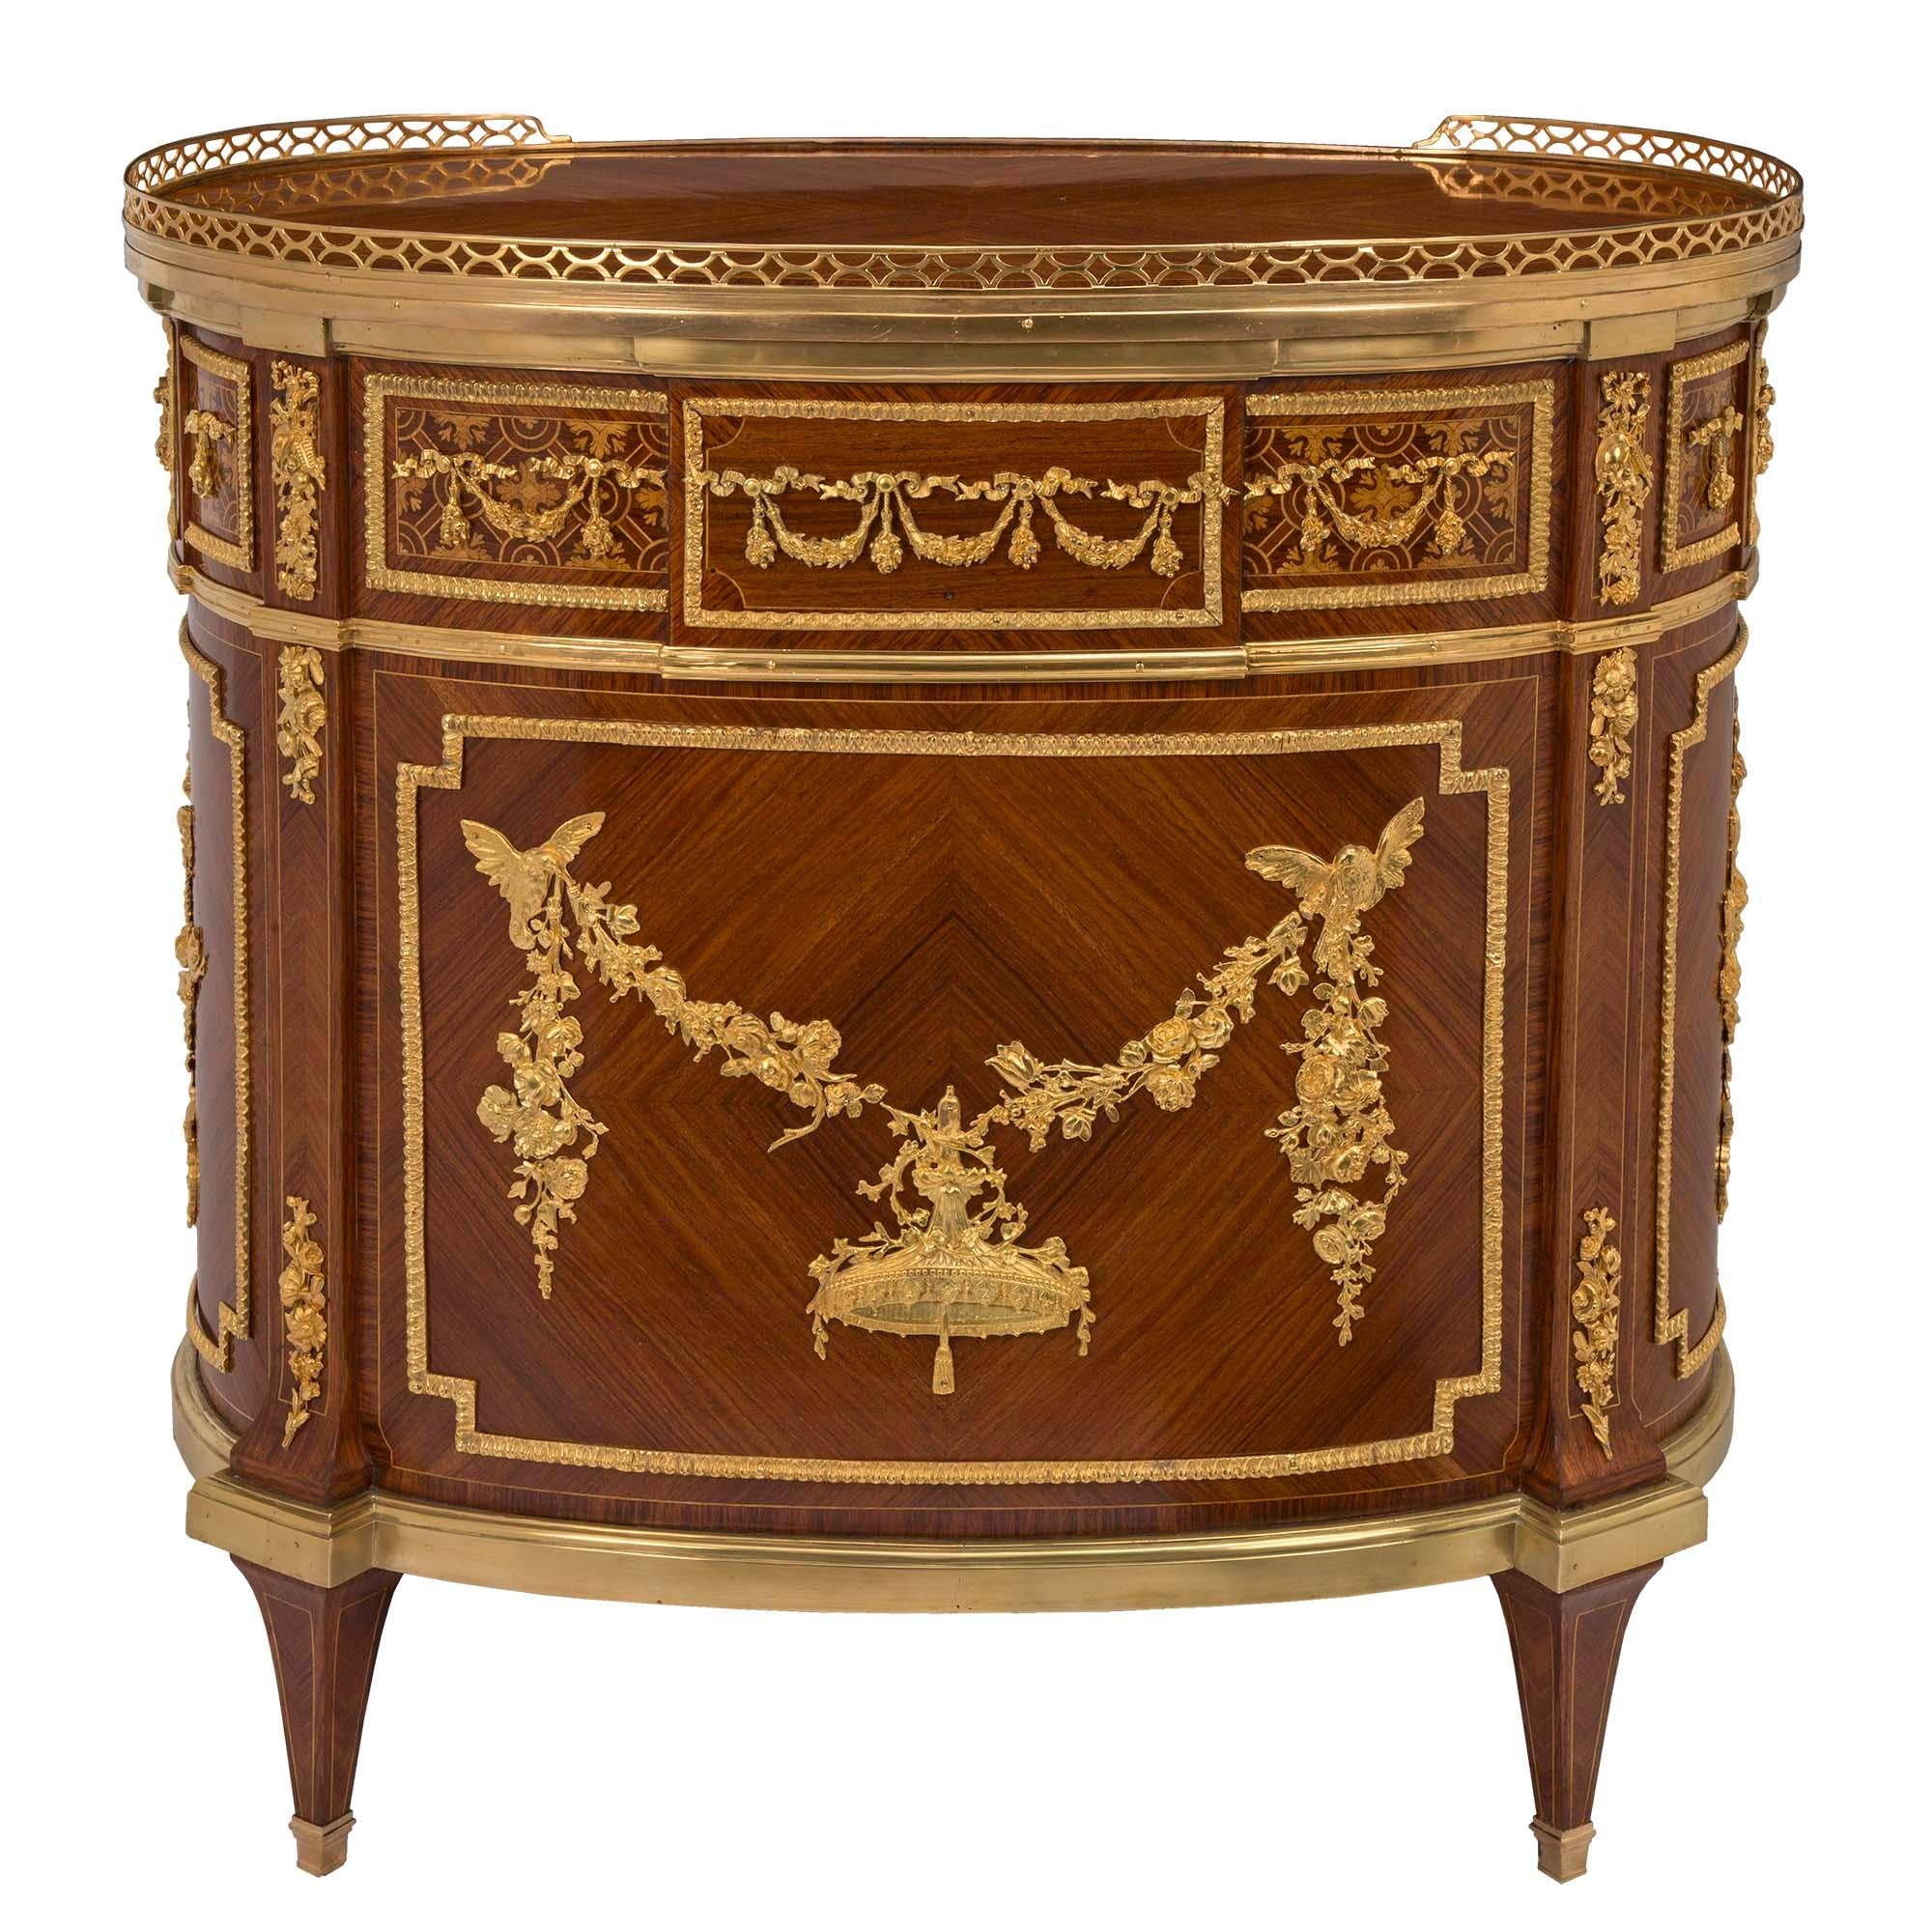 French 19th Century Louis XVI Style Tulipwood Side Table/Cabinet In Good Condition For Sale In West Palm Beach, FL